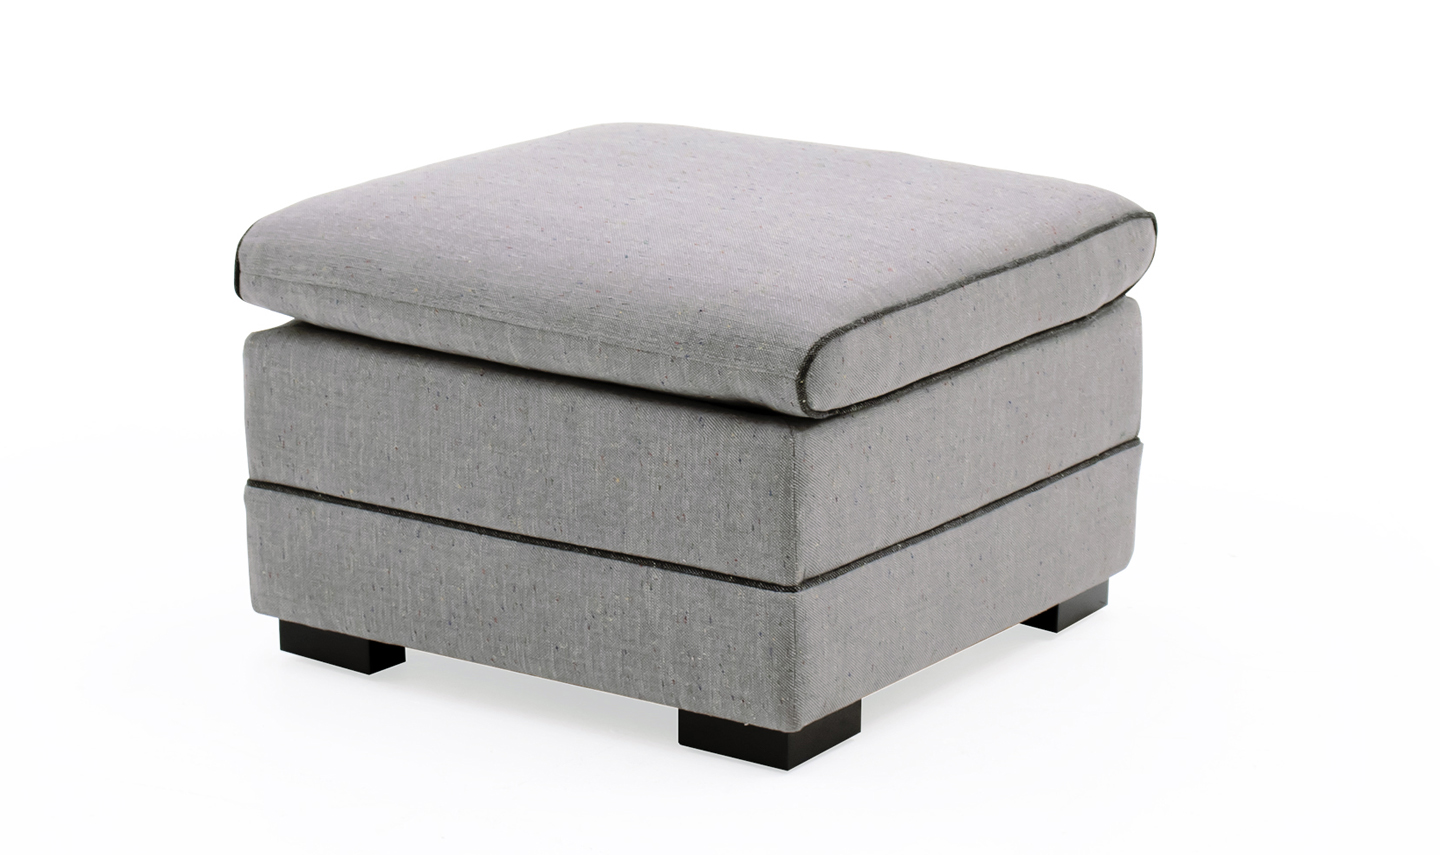 Ivy Otto Man – Footstool – The Furniture Centre Cork